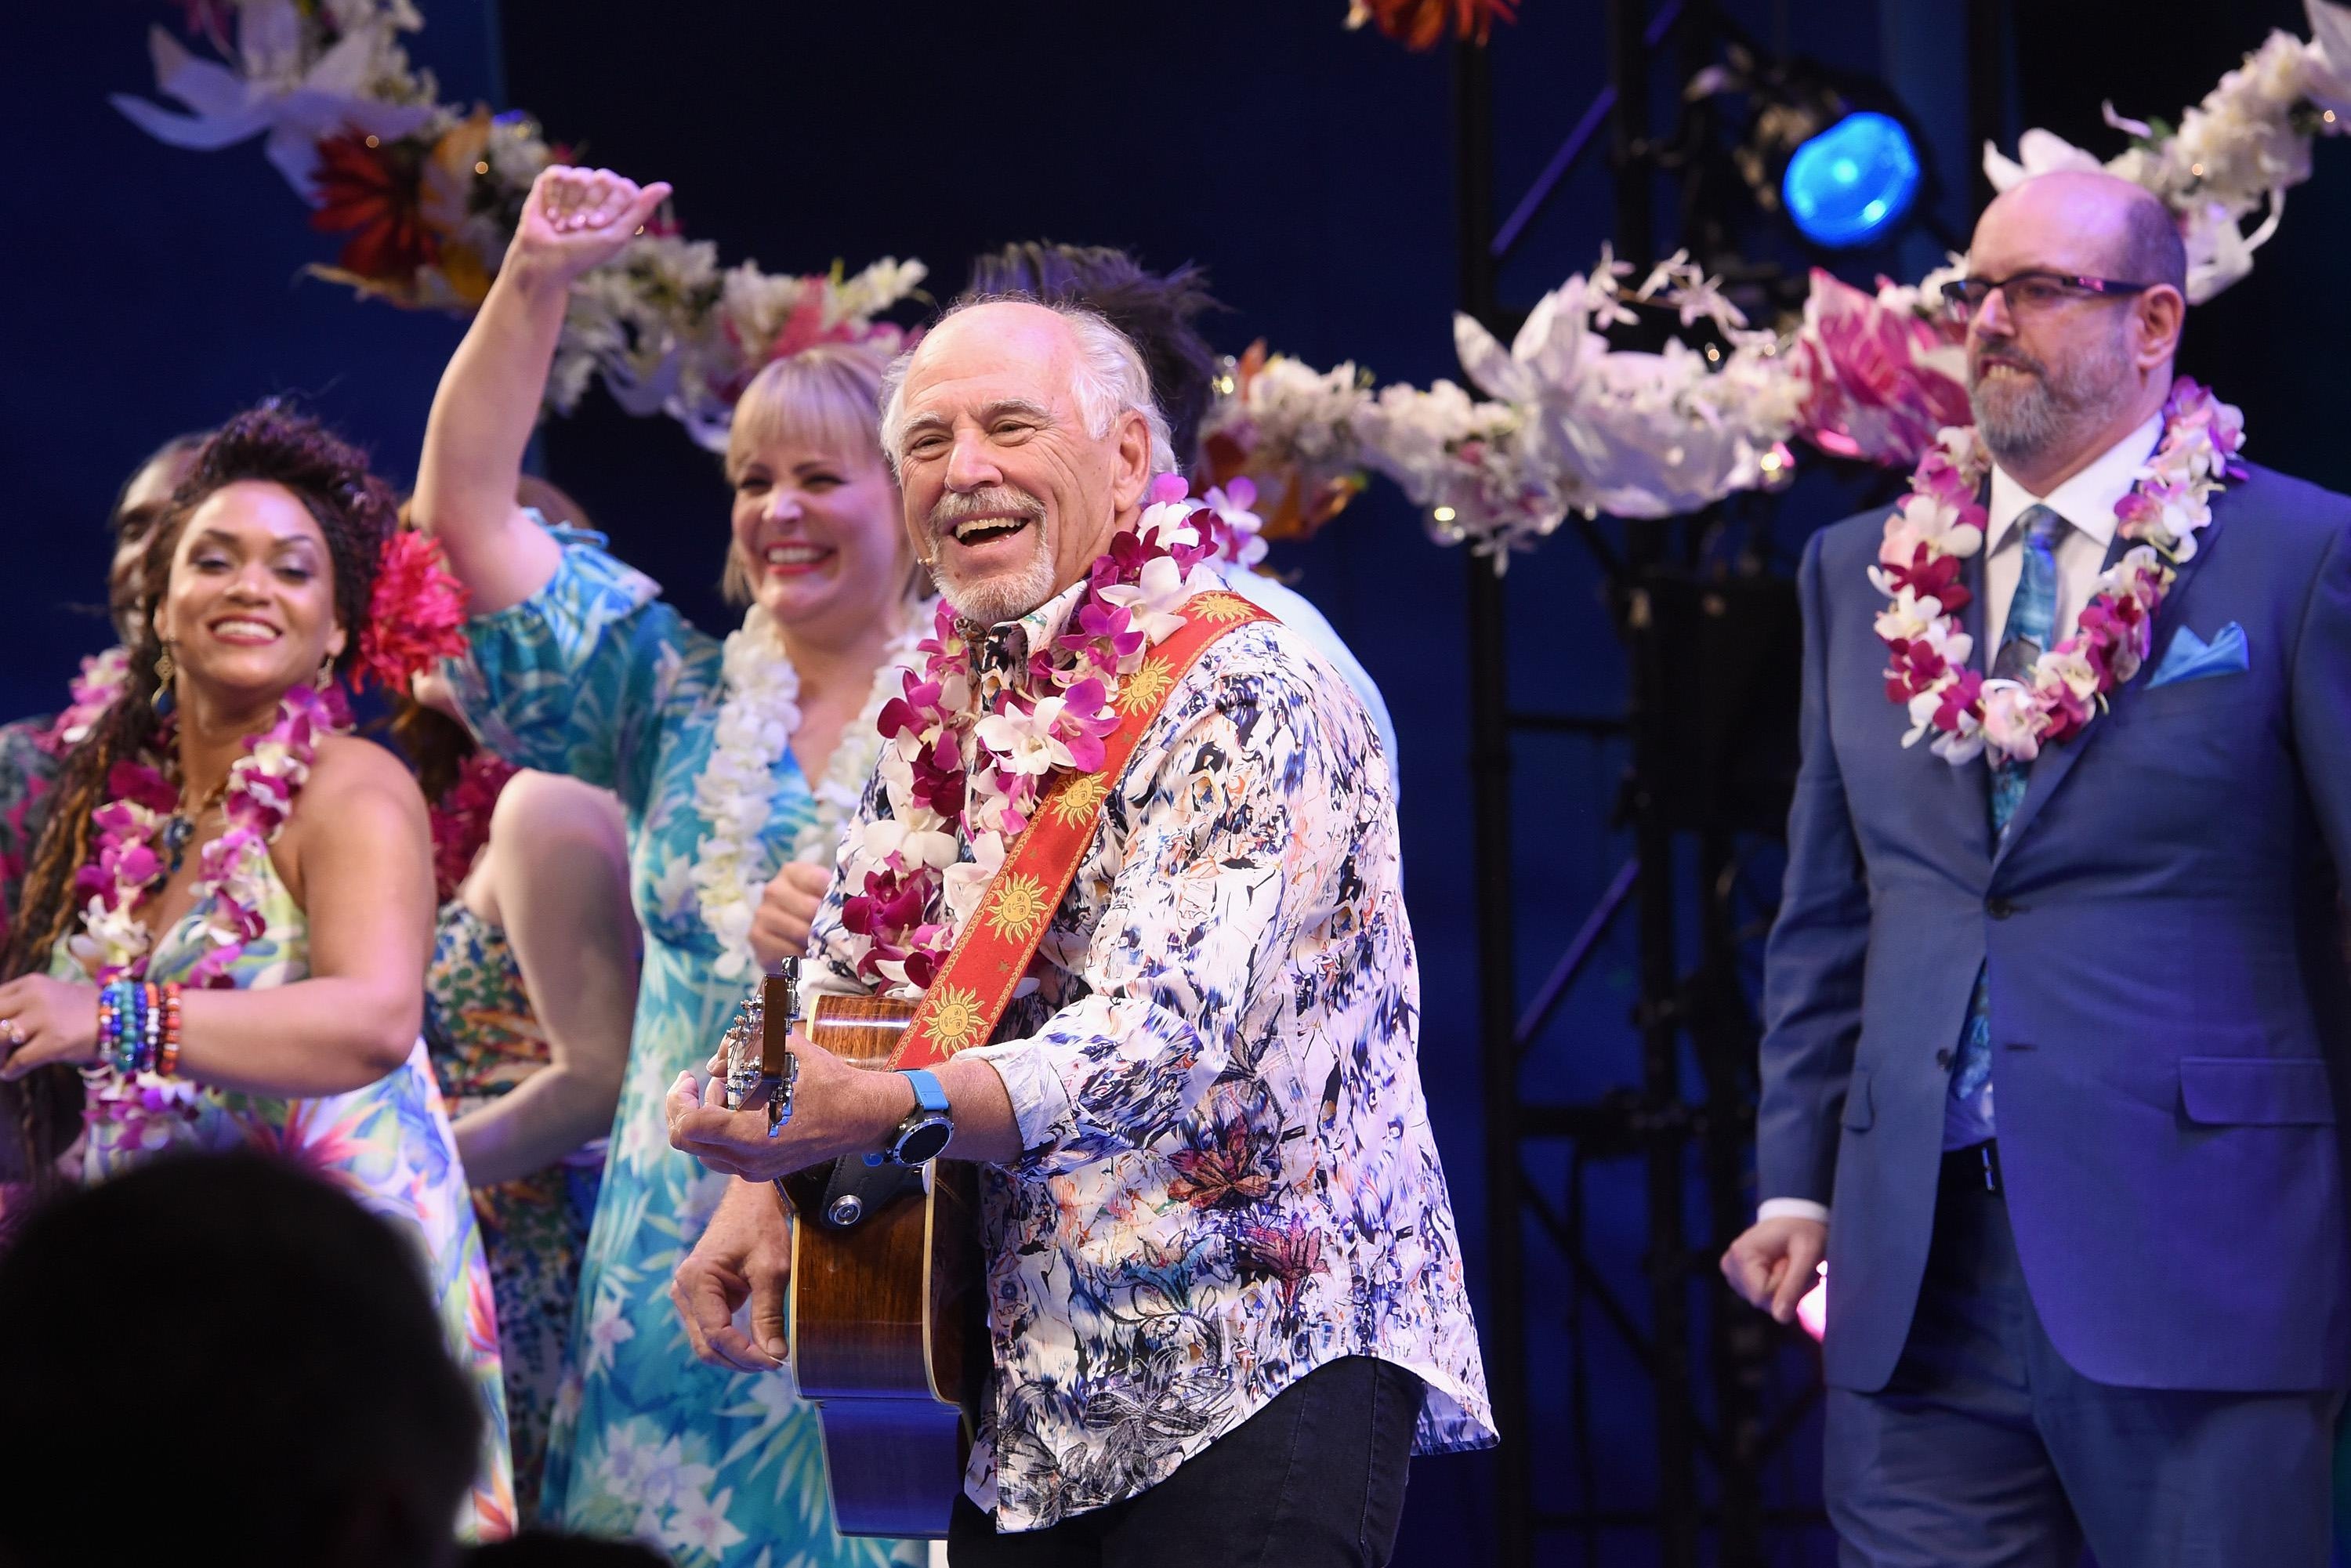 He smiles wide on a stage garlanded with leis, a lei over his shoulder,s white hair on his head, and little golden suns on the strap of his acoustic guitar.